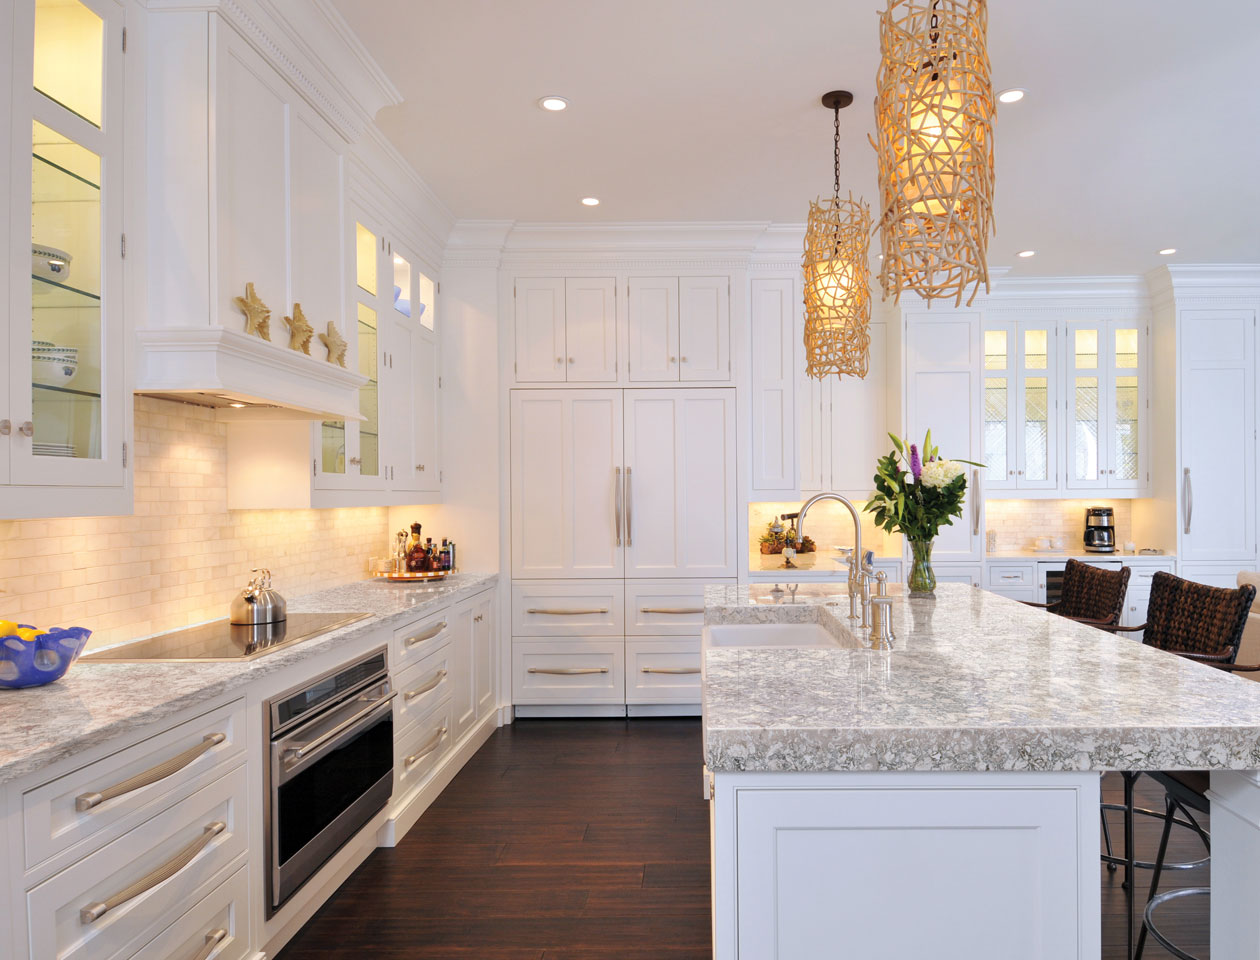 Quartz Vs Marble Countertops: Which Is Better? - International Granite And  Stone®